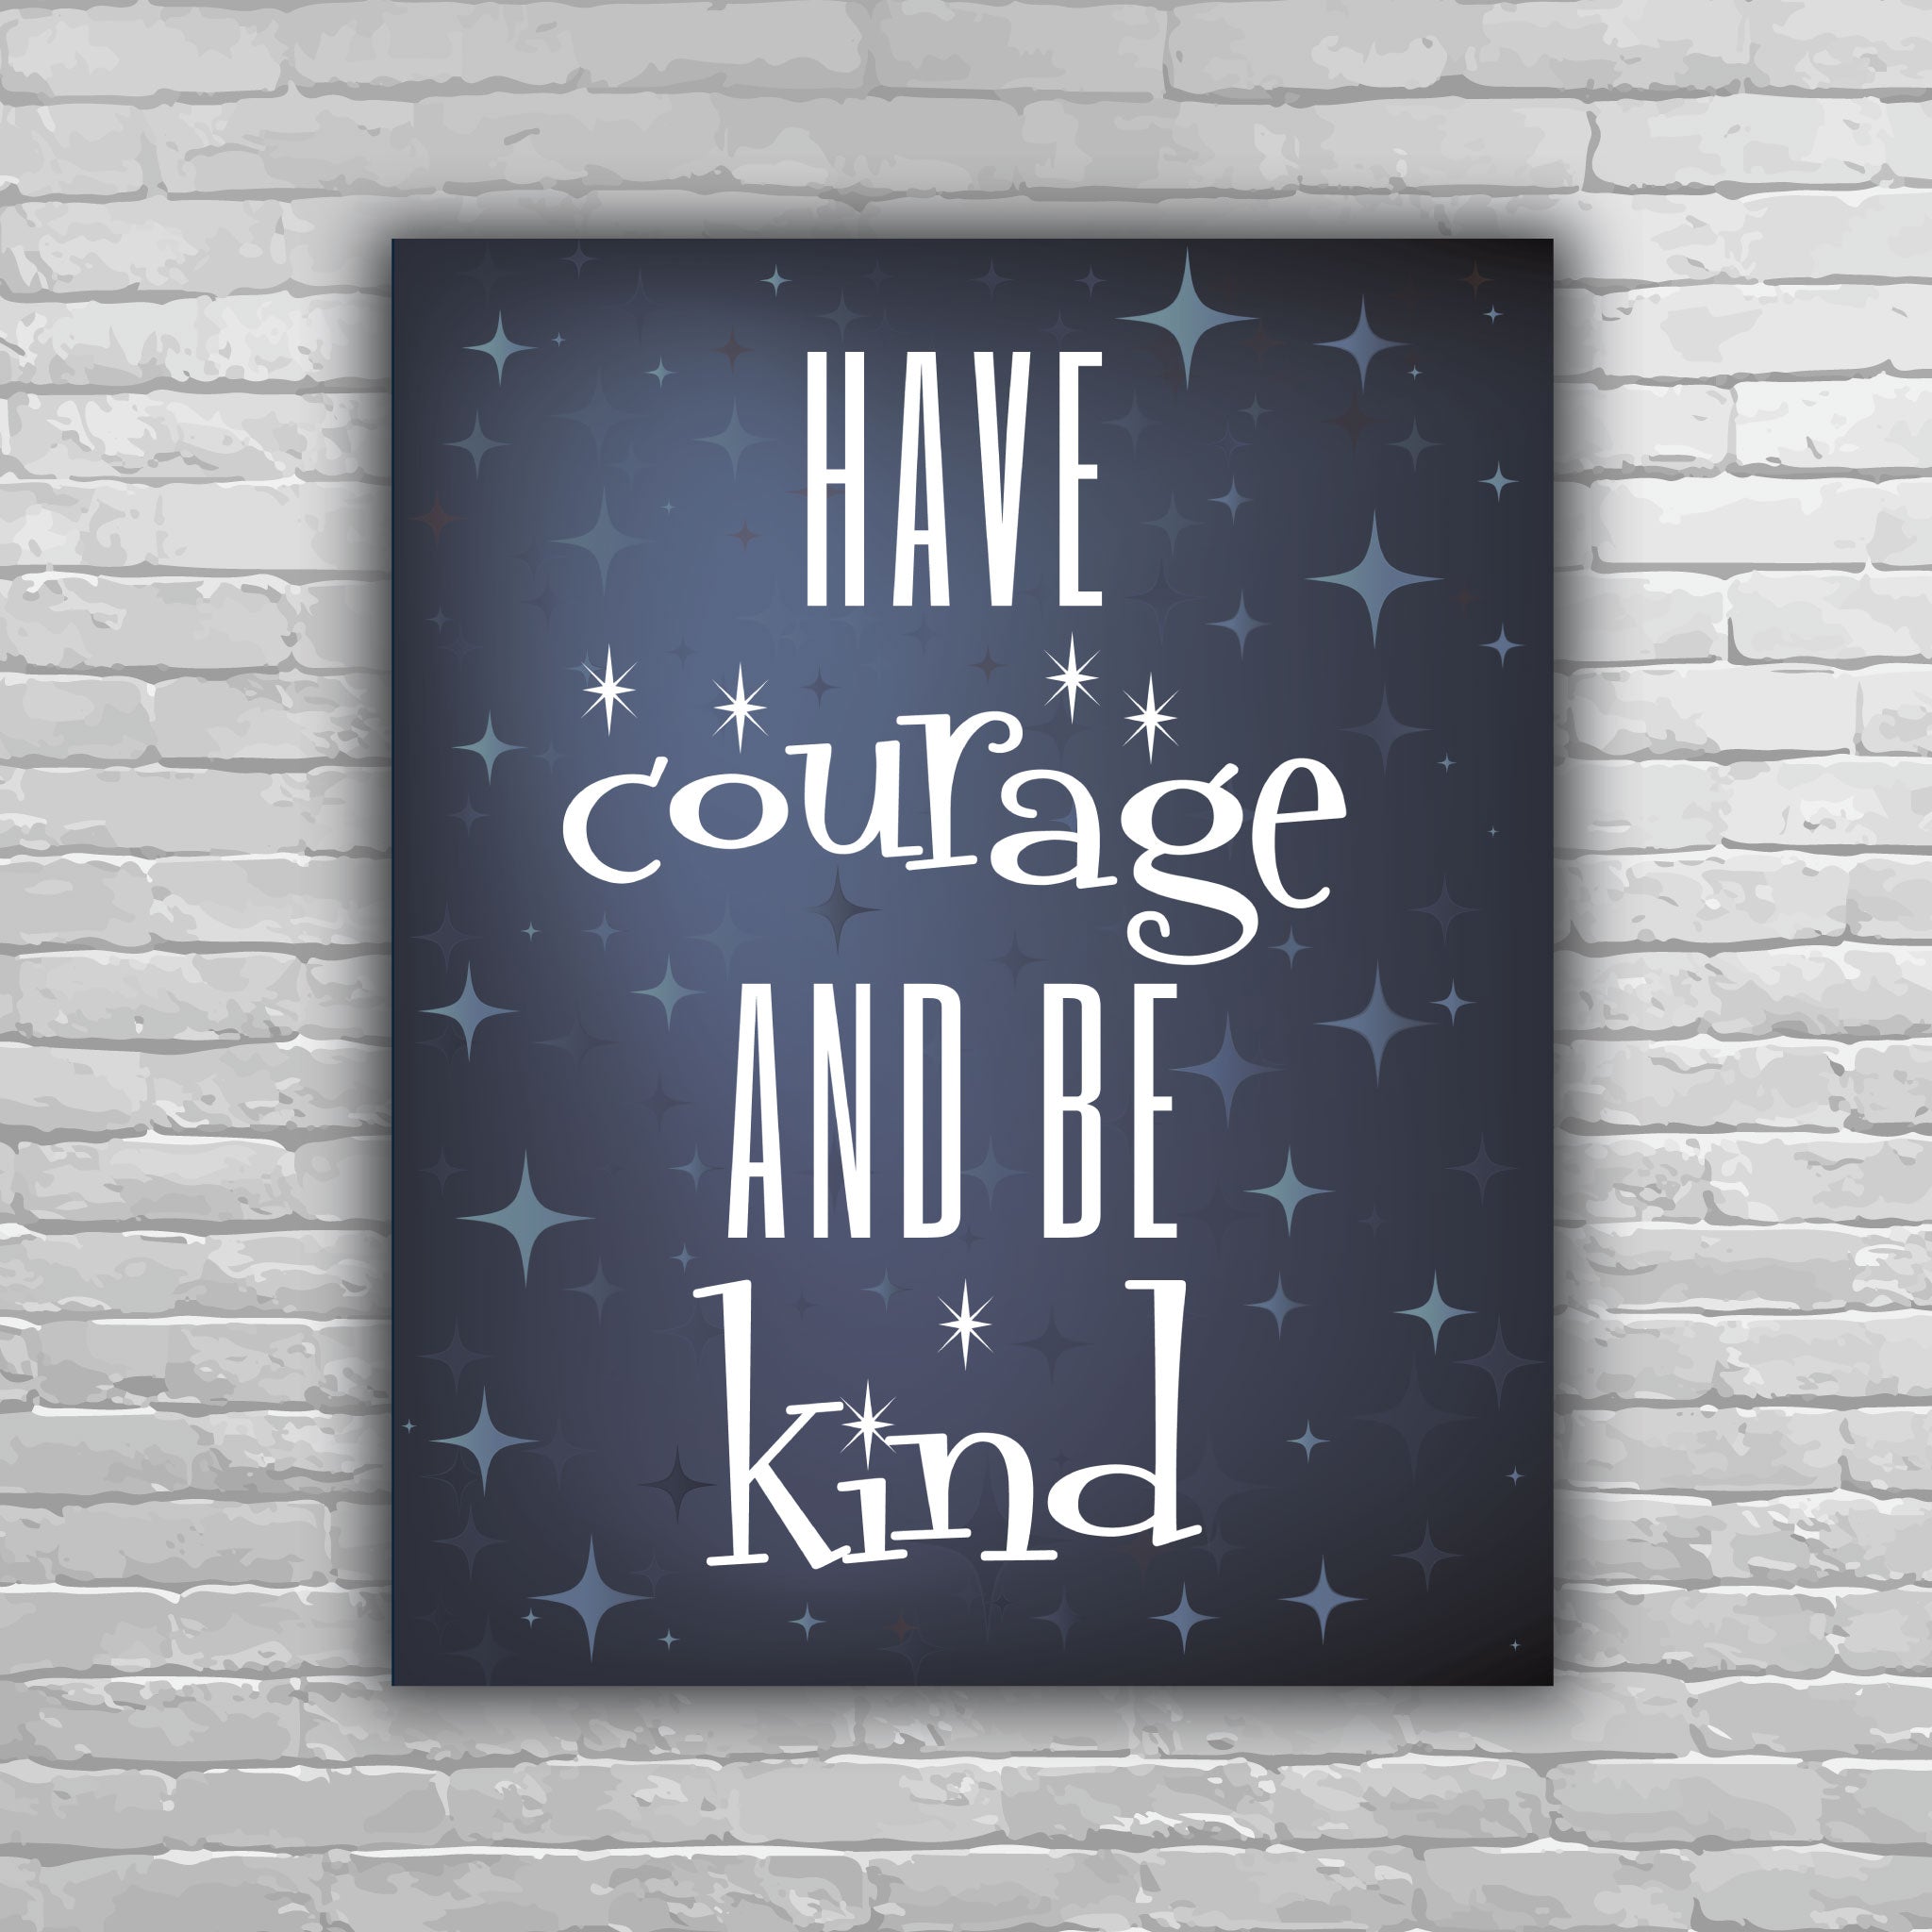 Have Courage and Be Kind, sparkles